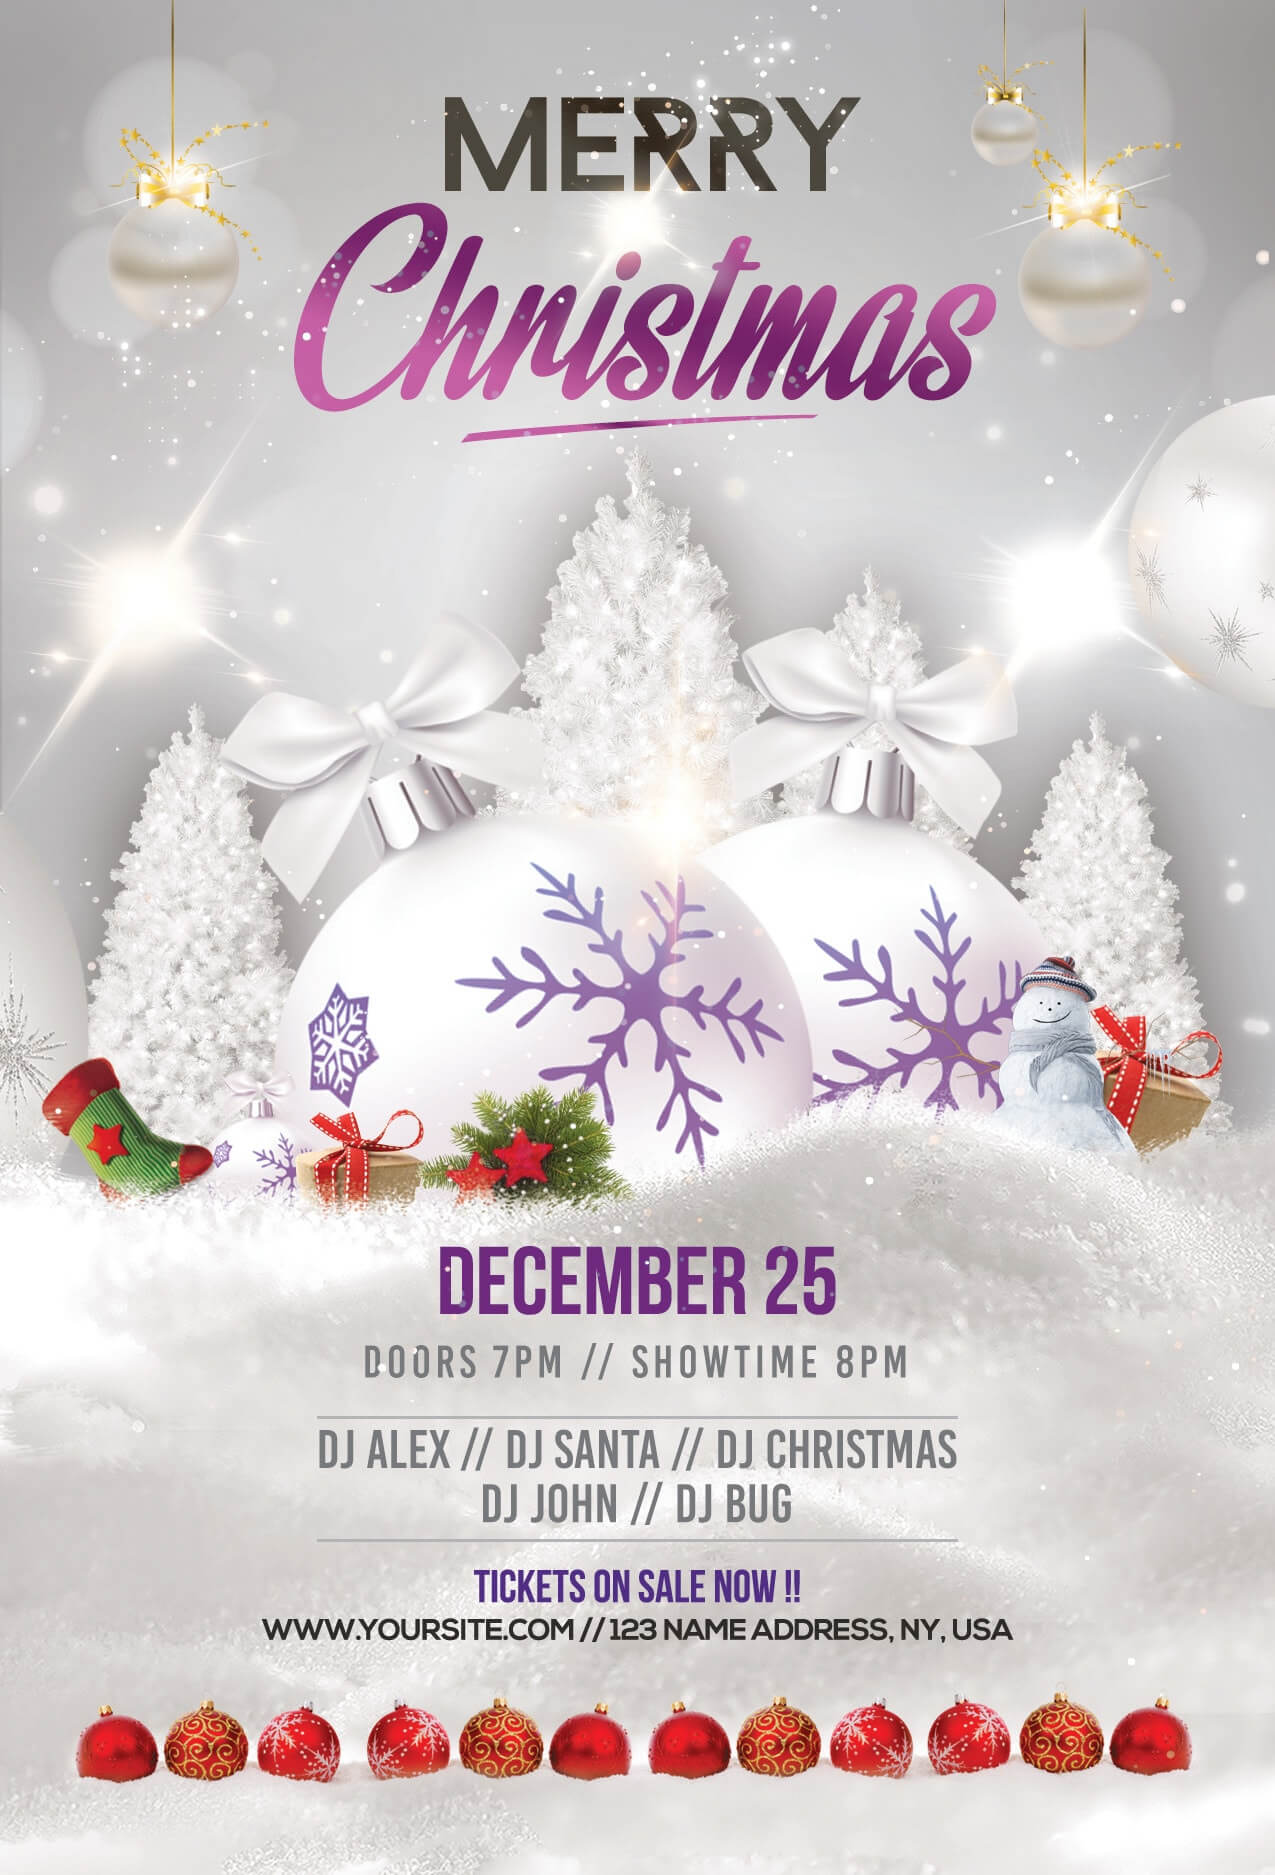 Merry Christmas & Holiday Free Psd Flyer Template - Stockpsd For Christmas Brochure Templates Free